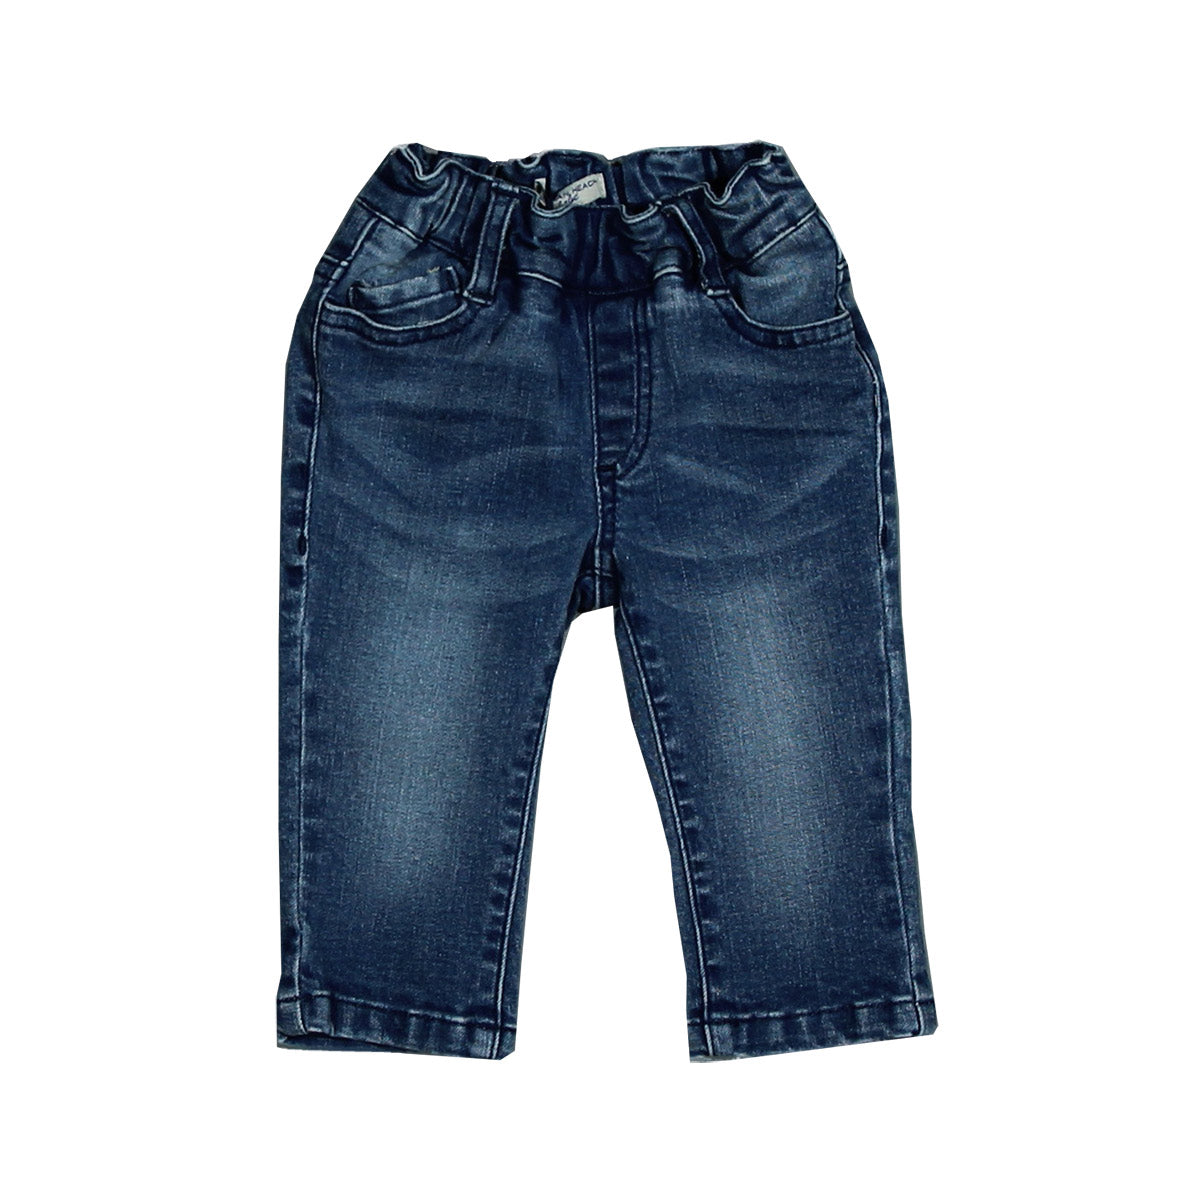 Baggy jeans from the Silvian Heach Kids clothing line, with a soft and elastic waist.
Composition...